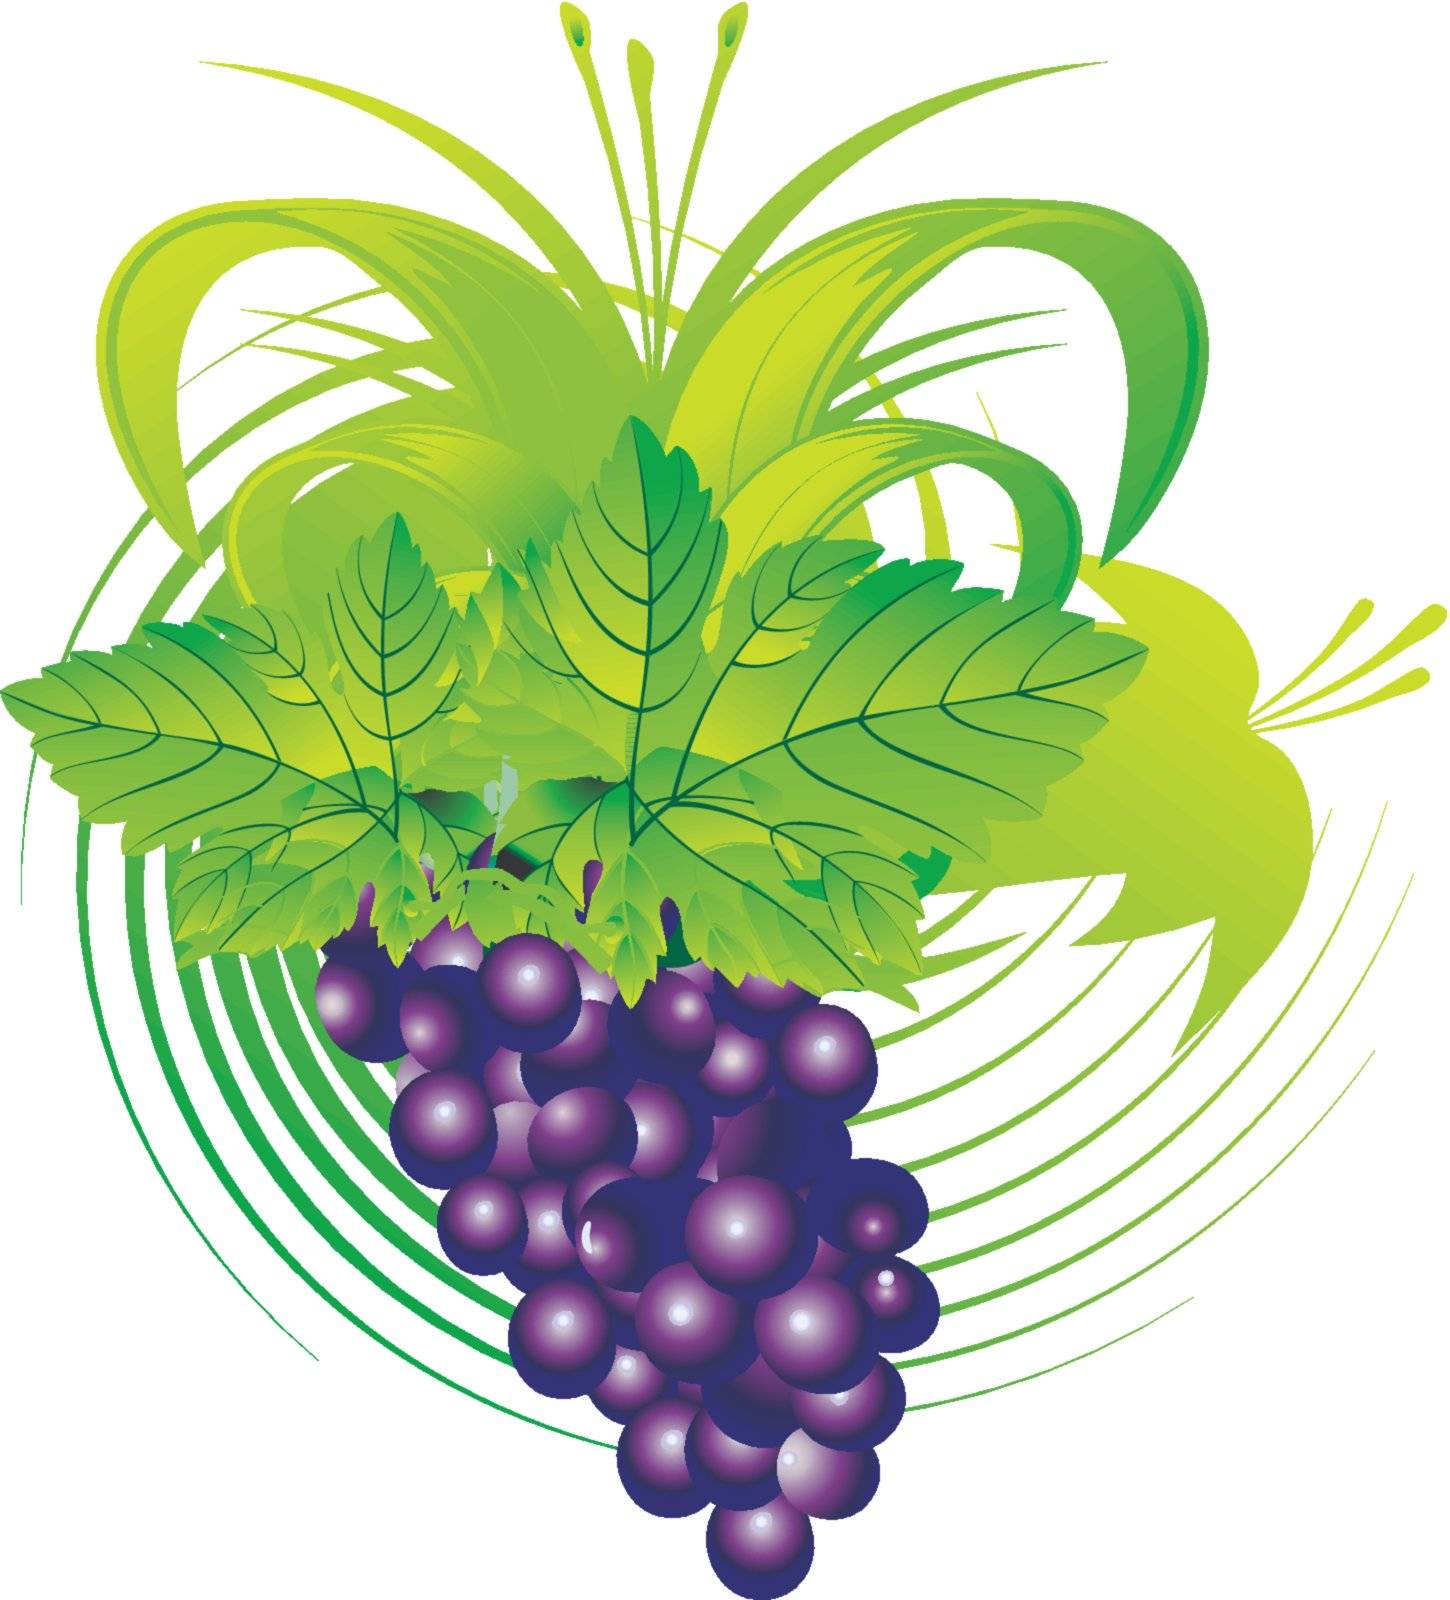 The stylised cluster of grapes with leaves on an abstract background